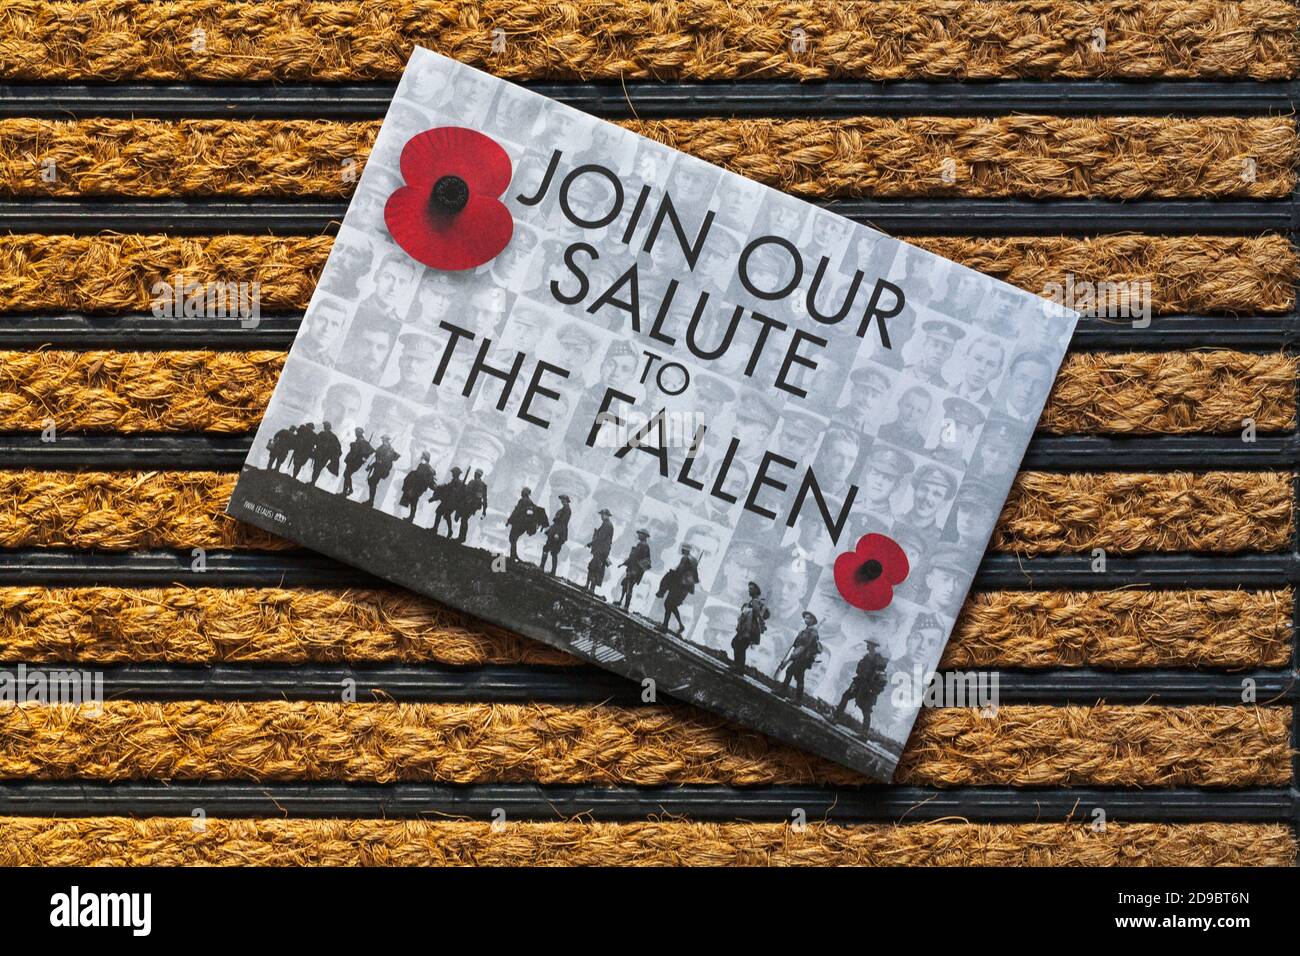 Post mail on doormat - charity appeal, the Royal British Legion - join our salute to the fallen Stock Photo